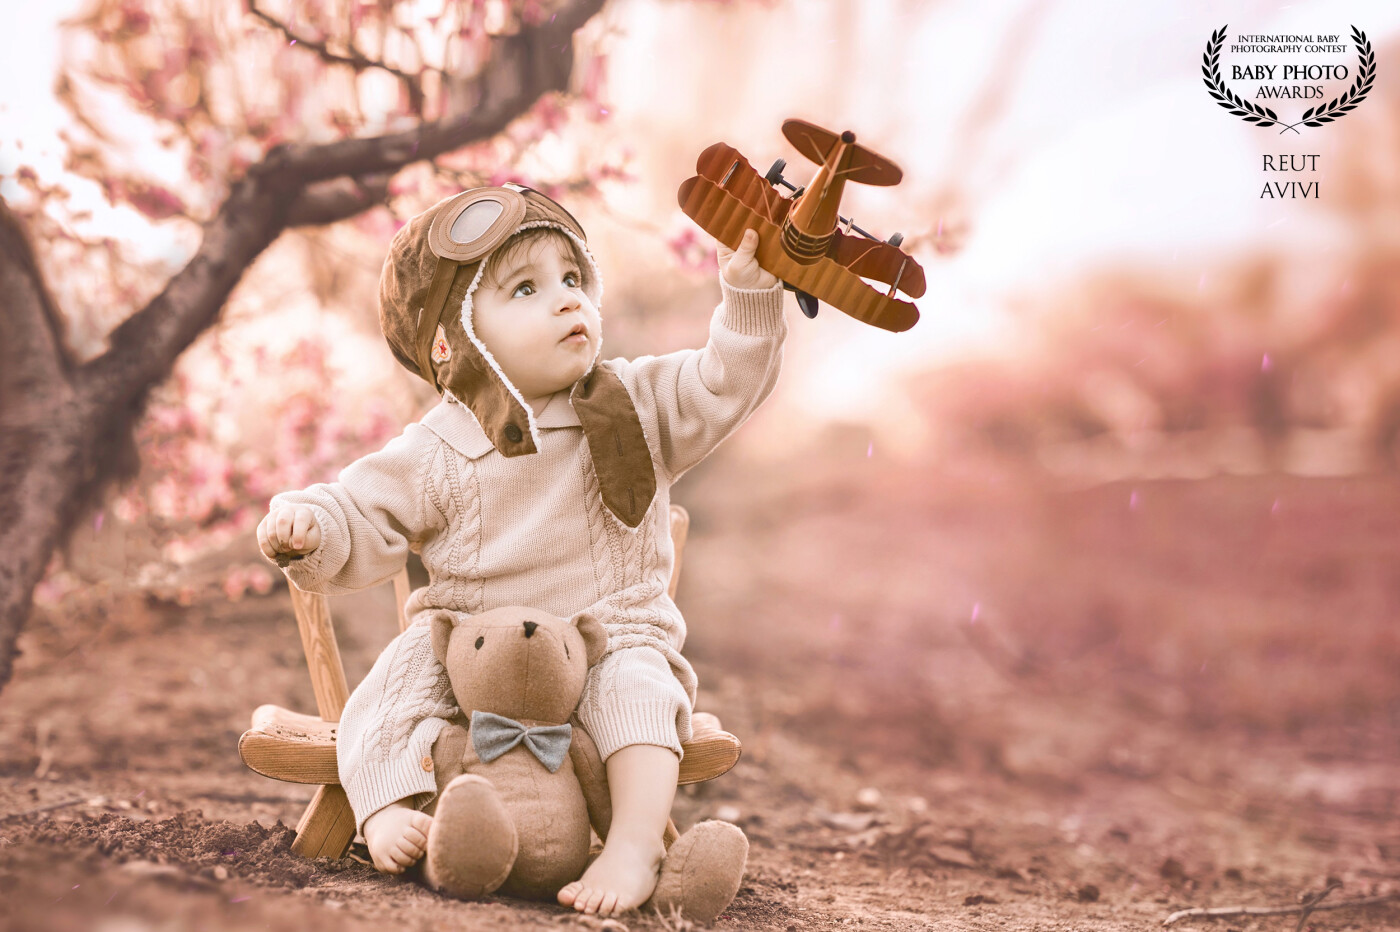 In a peach field with pink flowers, a one-year-old boy joyfully flies his airplane, feeling the thrill of adventure as he explores the magical world around him.